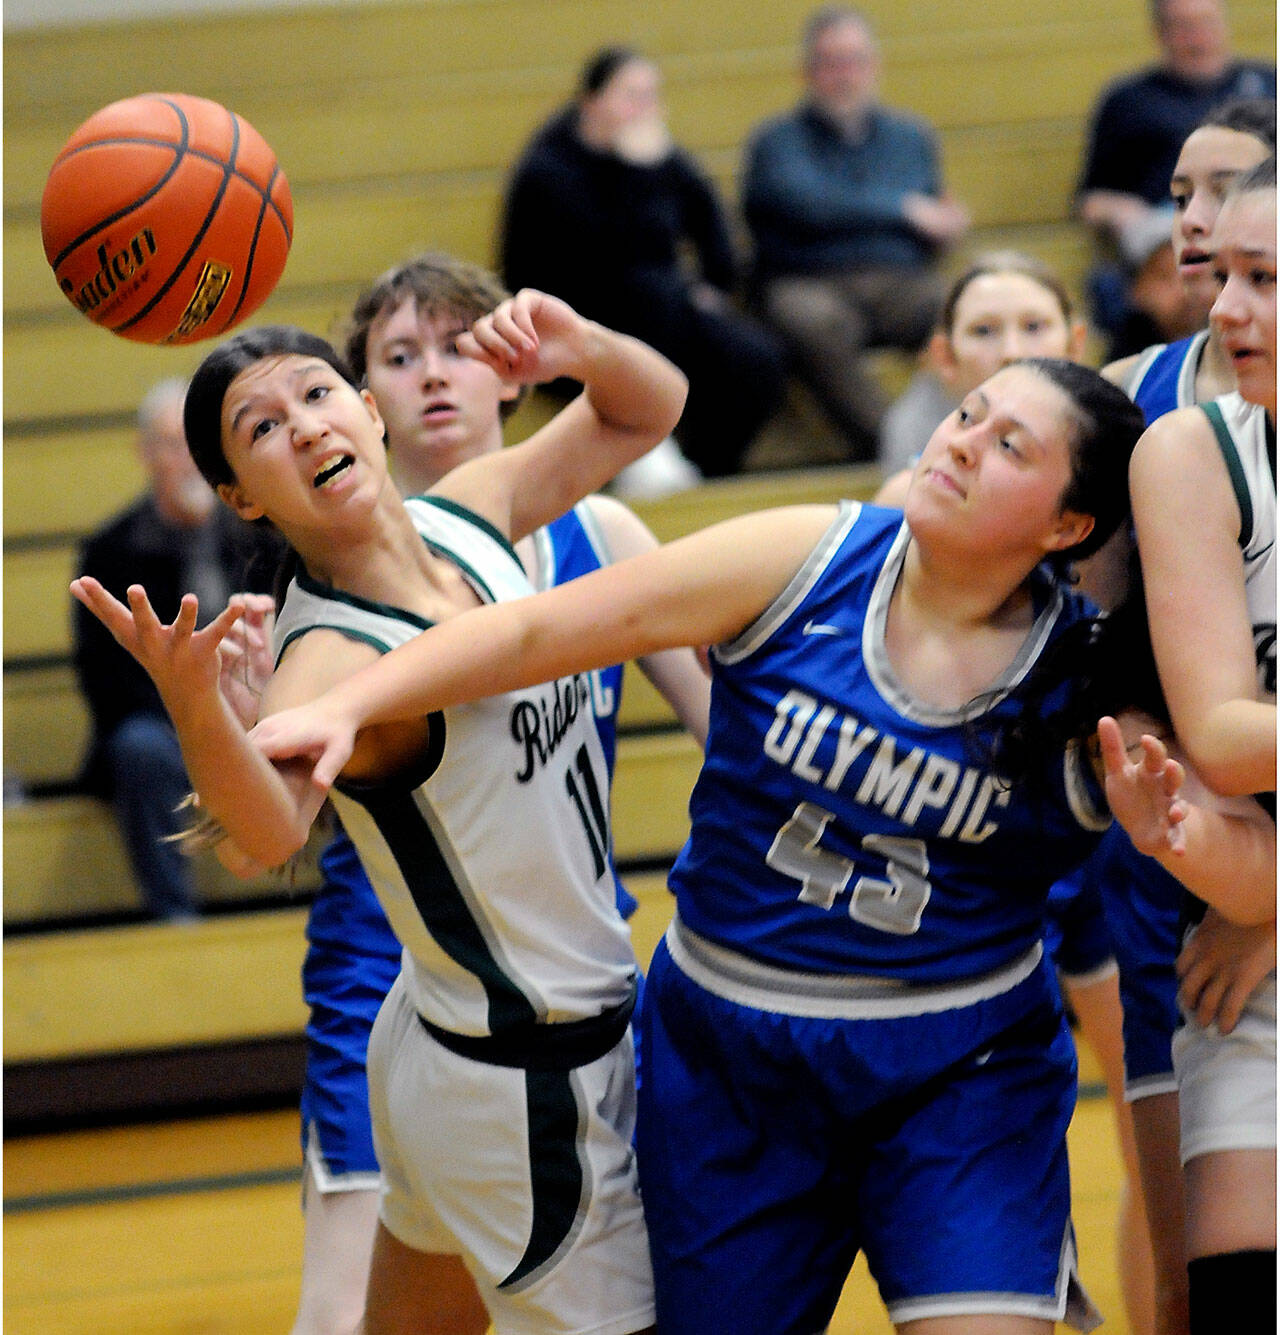 Port Angeles’ Lindsay Smith, left, stretches for a rebound next to Olympic’s Kylee Murphy during a Jan. 20 game in Port Angeles. The Roughriders play in regionals Friday night. (Keith Thorpe/Peninsula Daily News)